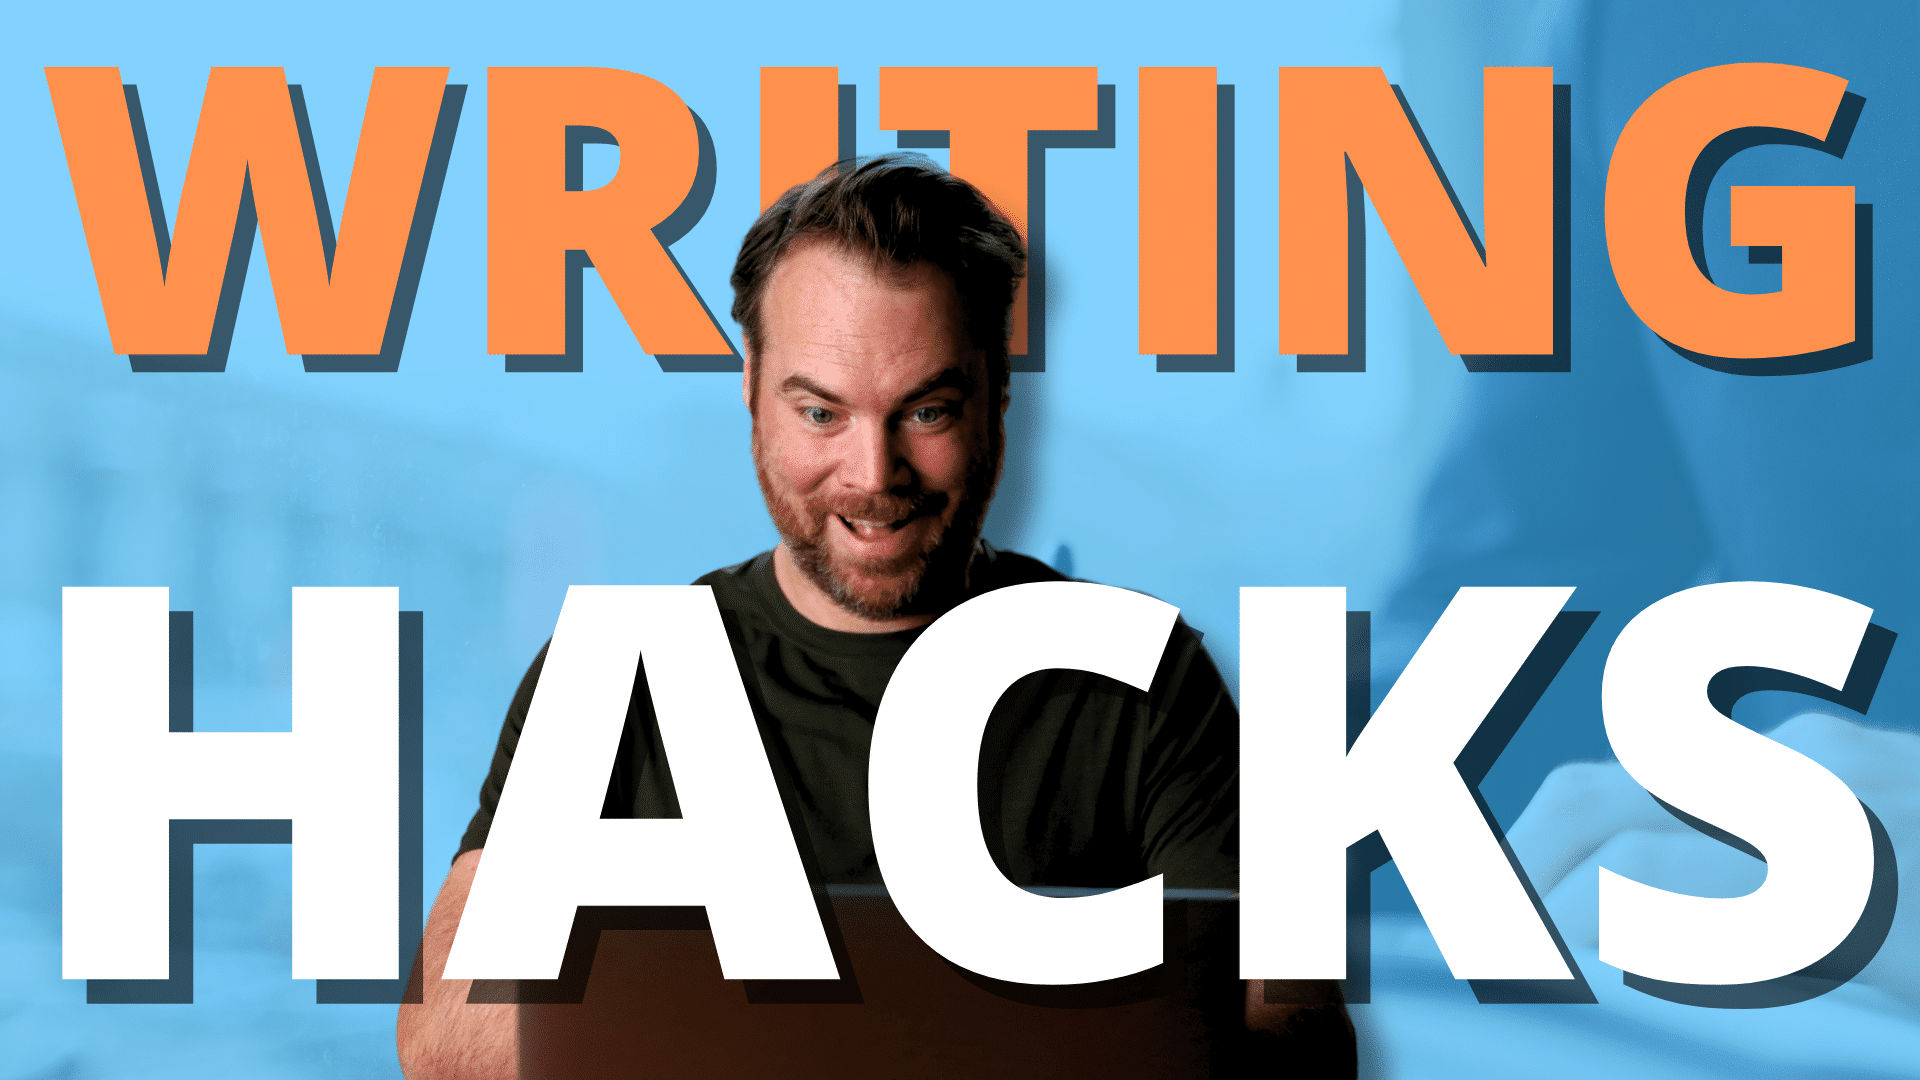 6 Freelance Writing Hacks to Make Your First $1,000 FAST